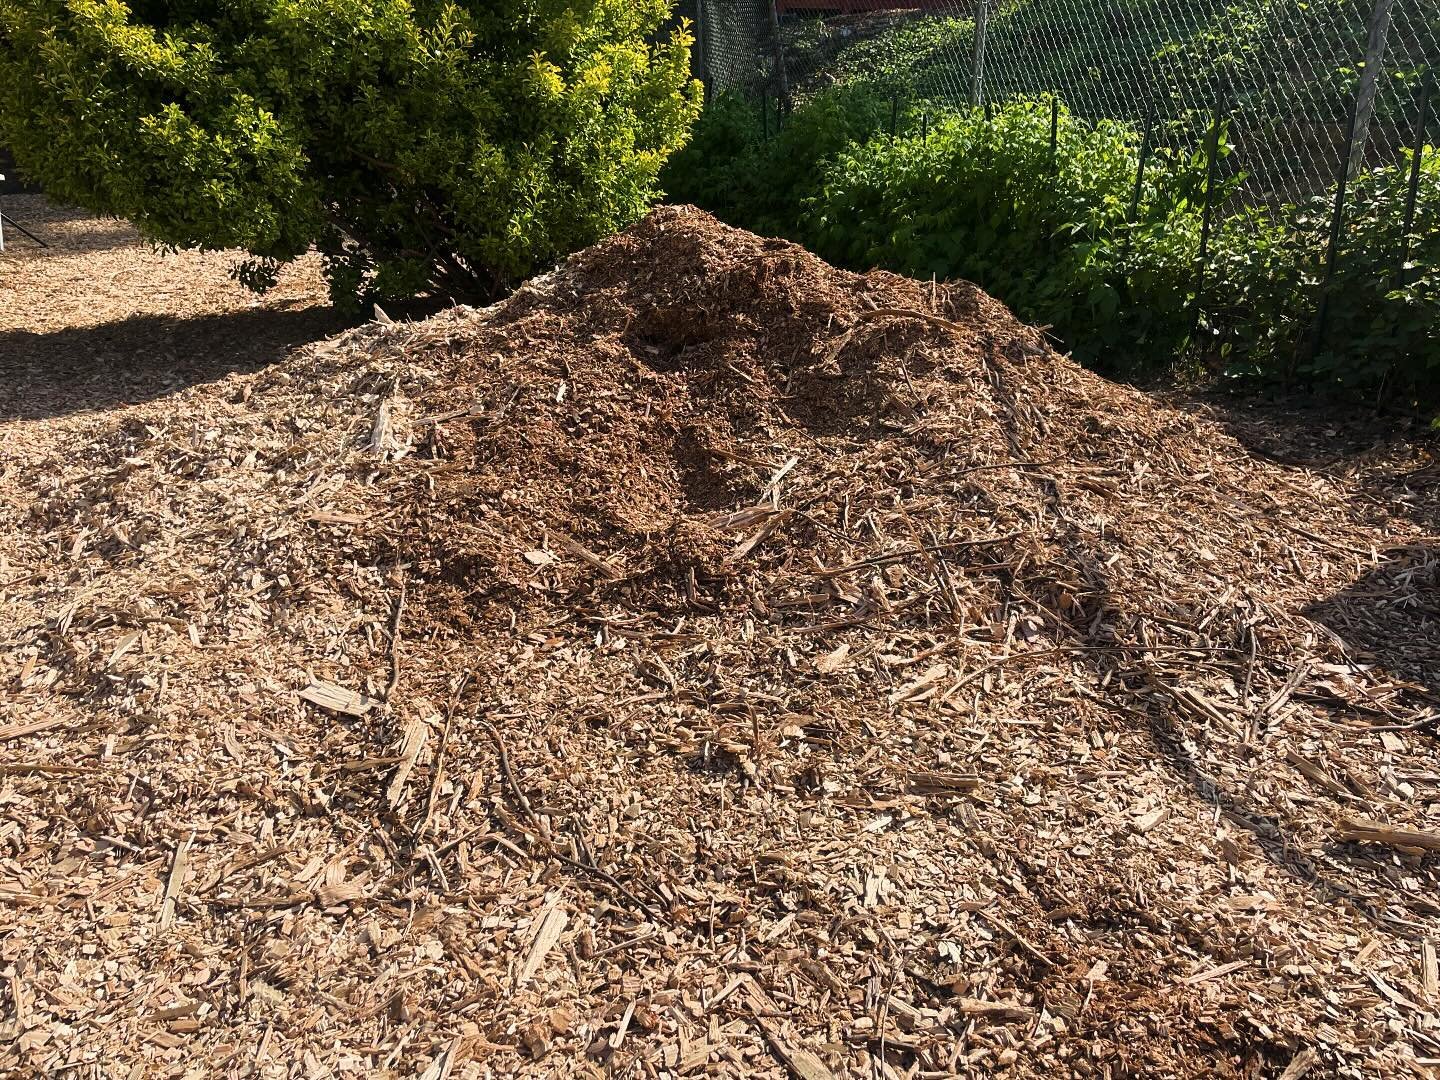 🌳 Free Mulch for Your Garden. As part of our wood reclamation efforts, we got a giant wood chip delivery from landscapers who removed trees in the area, which we use for mulch on the farm paths. Benefits of mulching include retaining water to help e